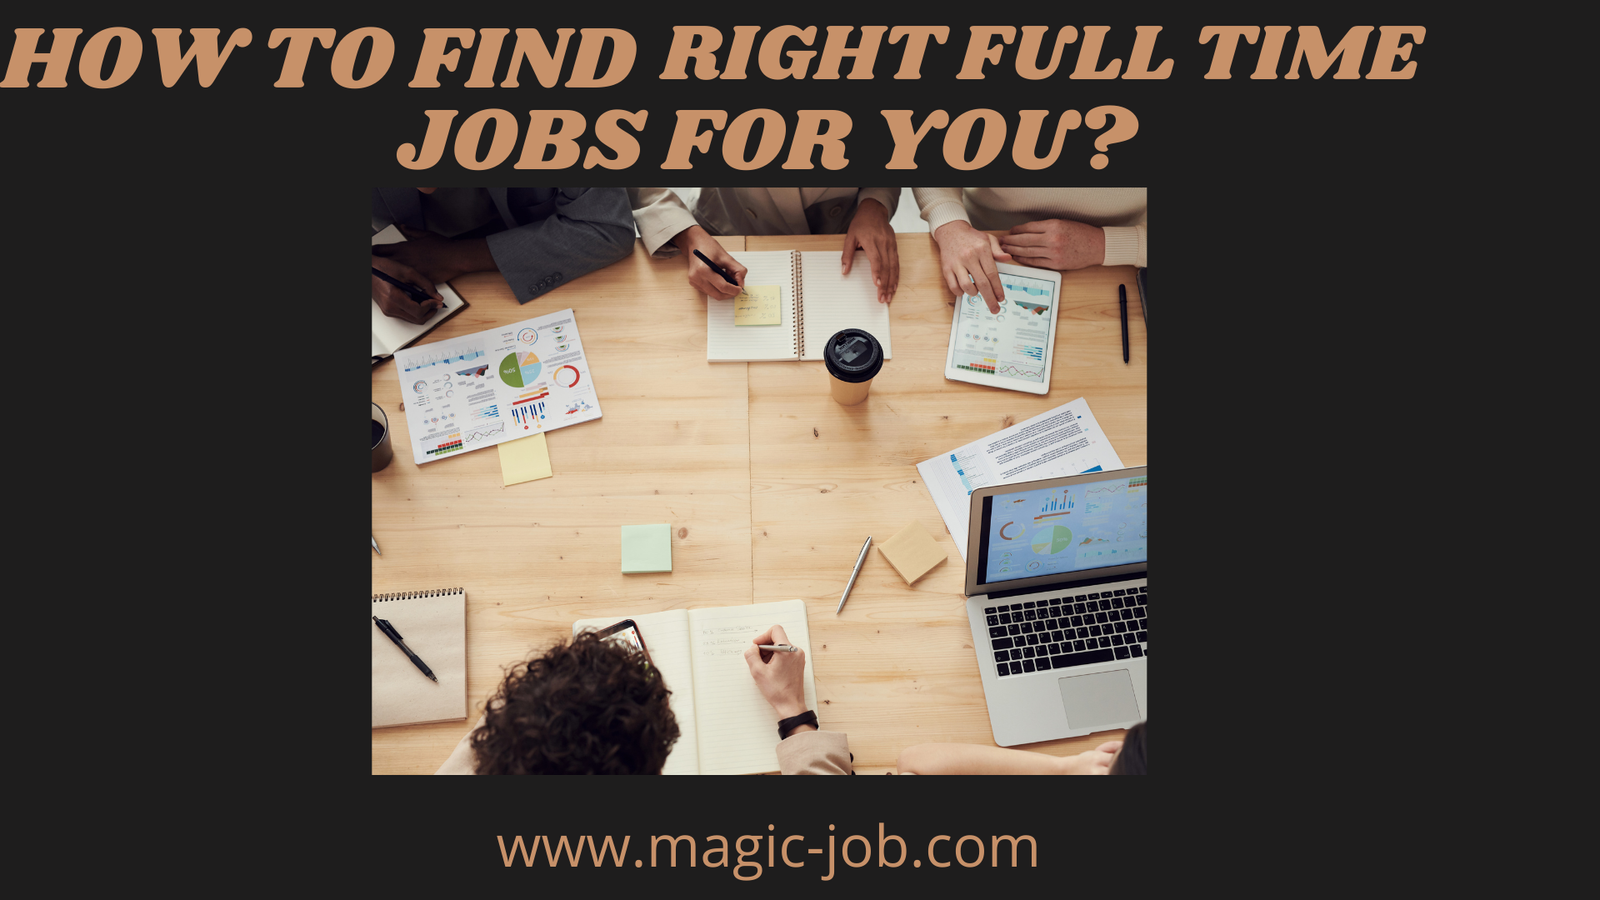 How Can You Find a Full-Time Job? image